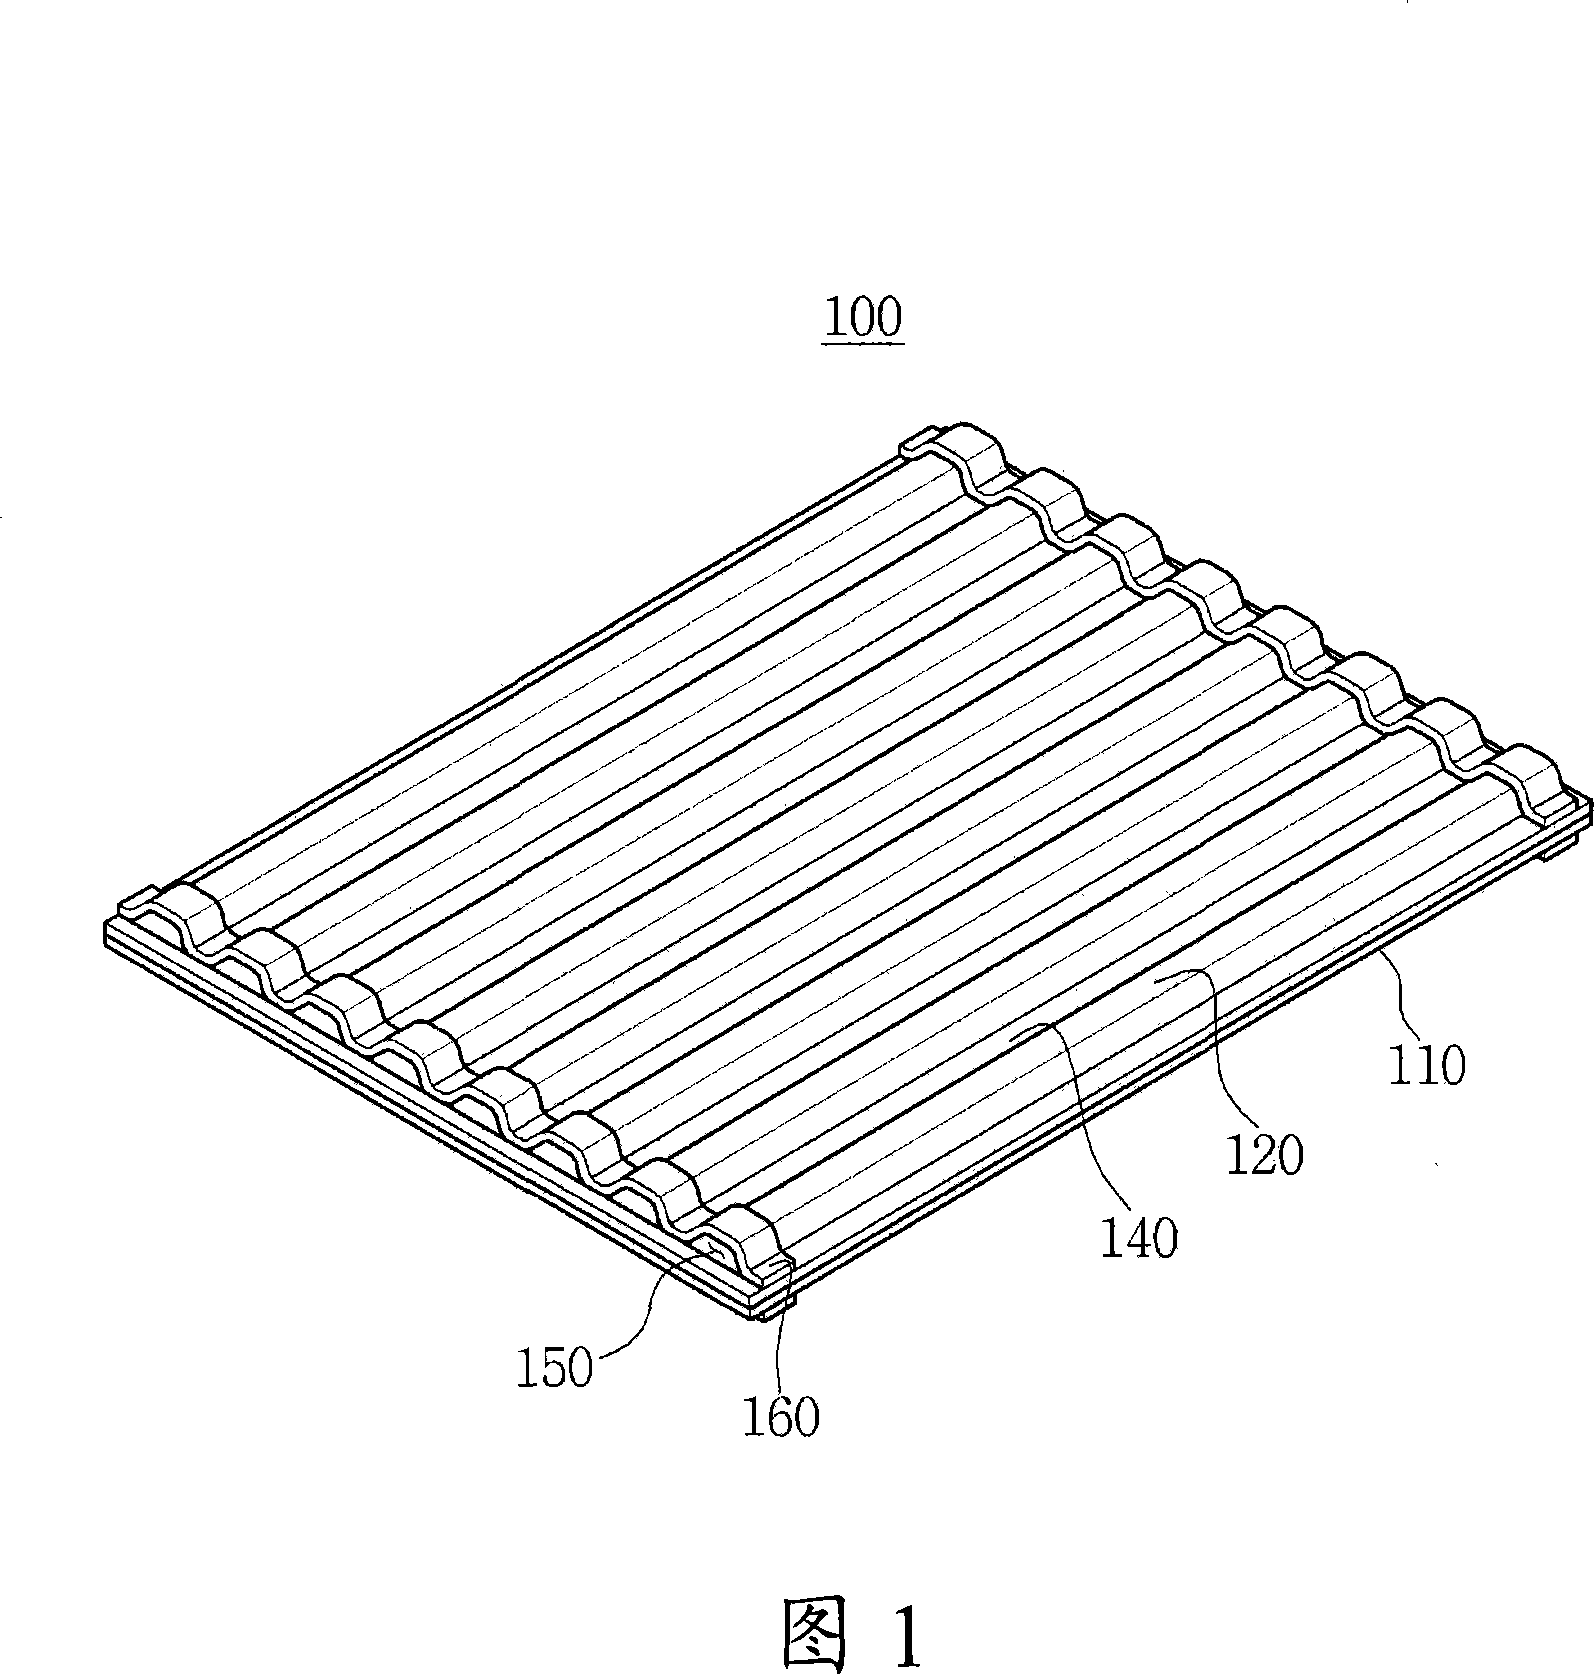 Surface light source device having secondary electron emission layer, method of manufacturing the same, and backlight unit having the same